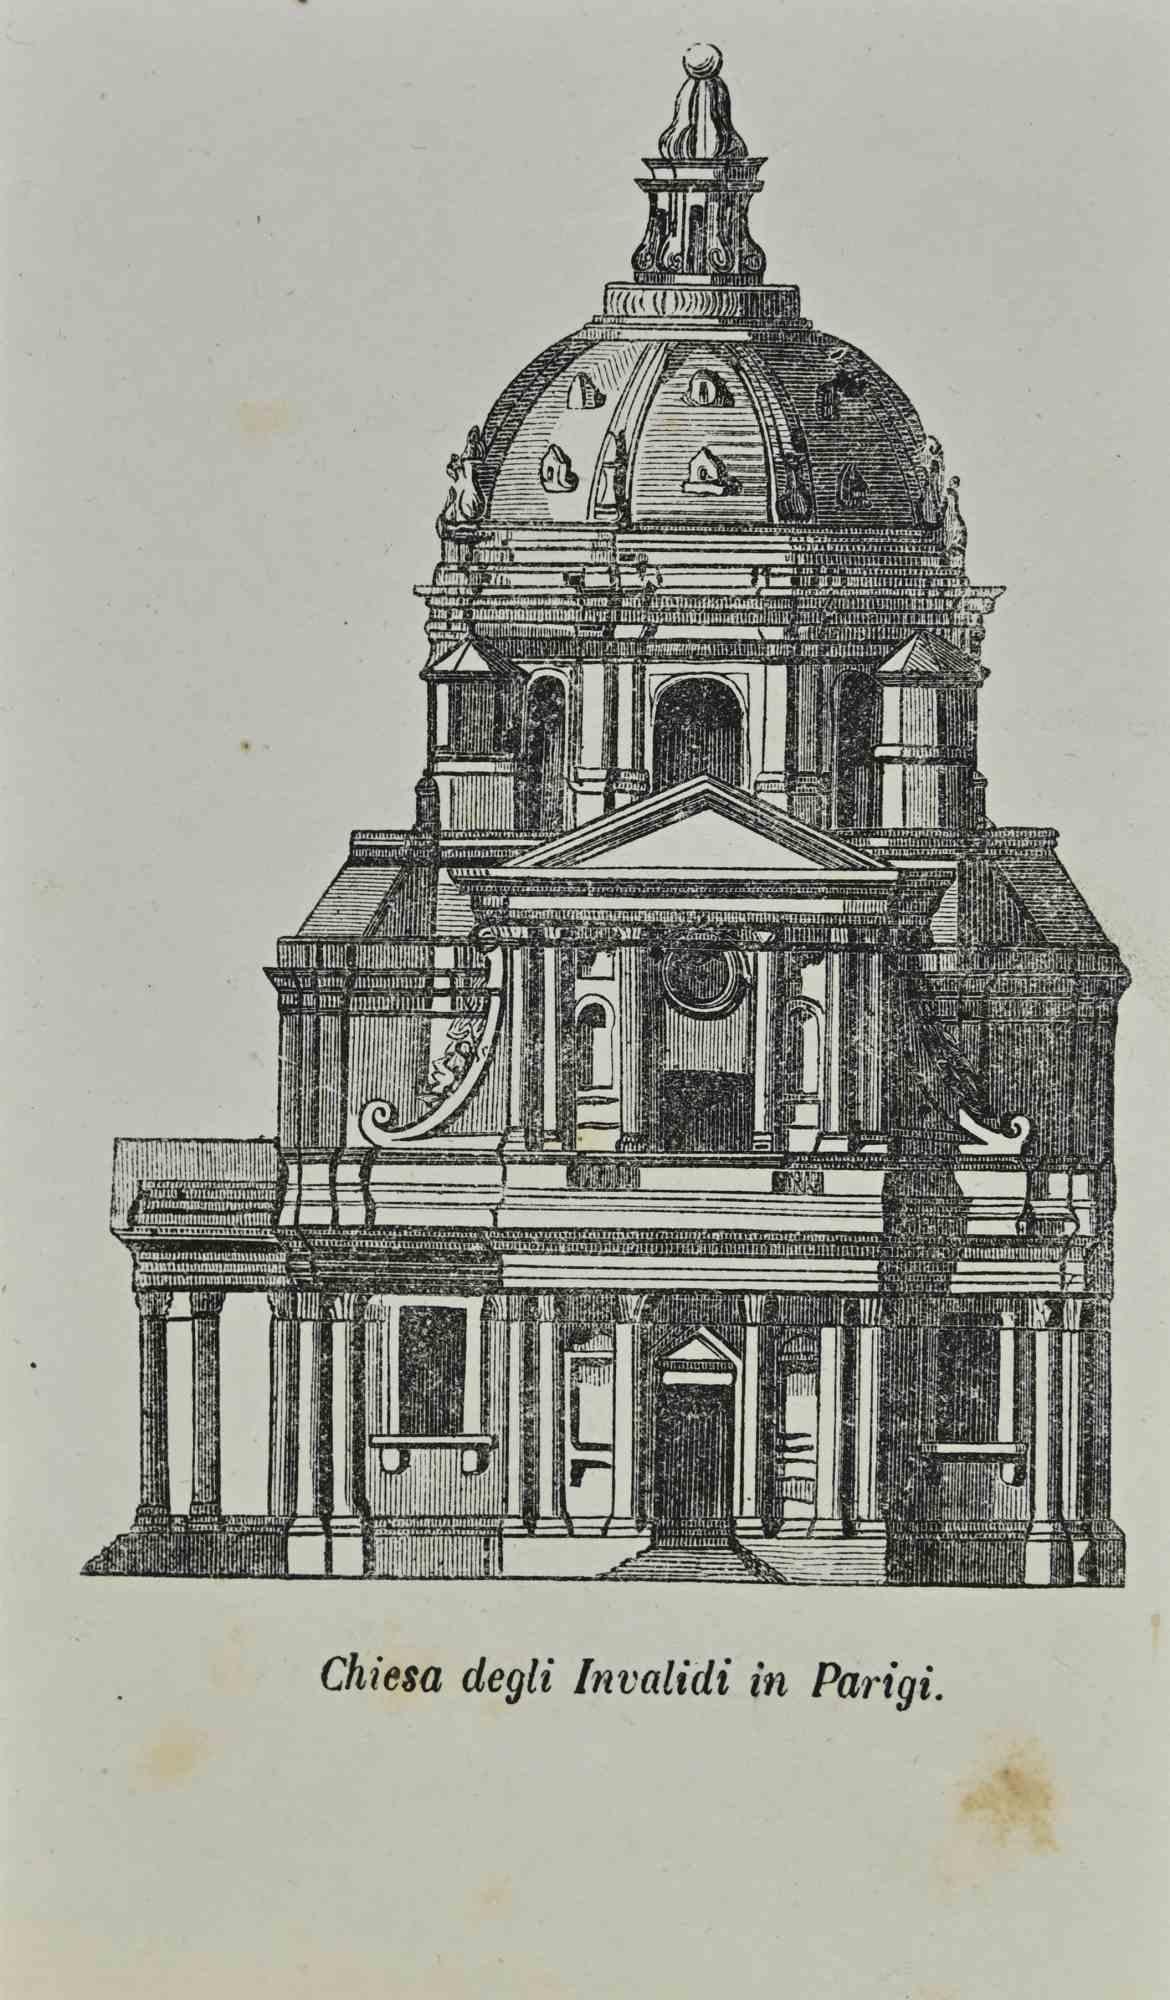 Church of the Invalids in Paris is a lithograph made by Auguste Wahlen in 1844.

Good condition.

Drawing in black and white.

At the center of the artwork is the original title "Chiesa degli Invalidi in Parigi".

The work is part of Suite Moeurs,